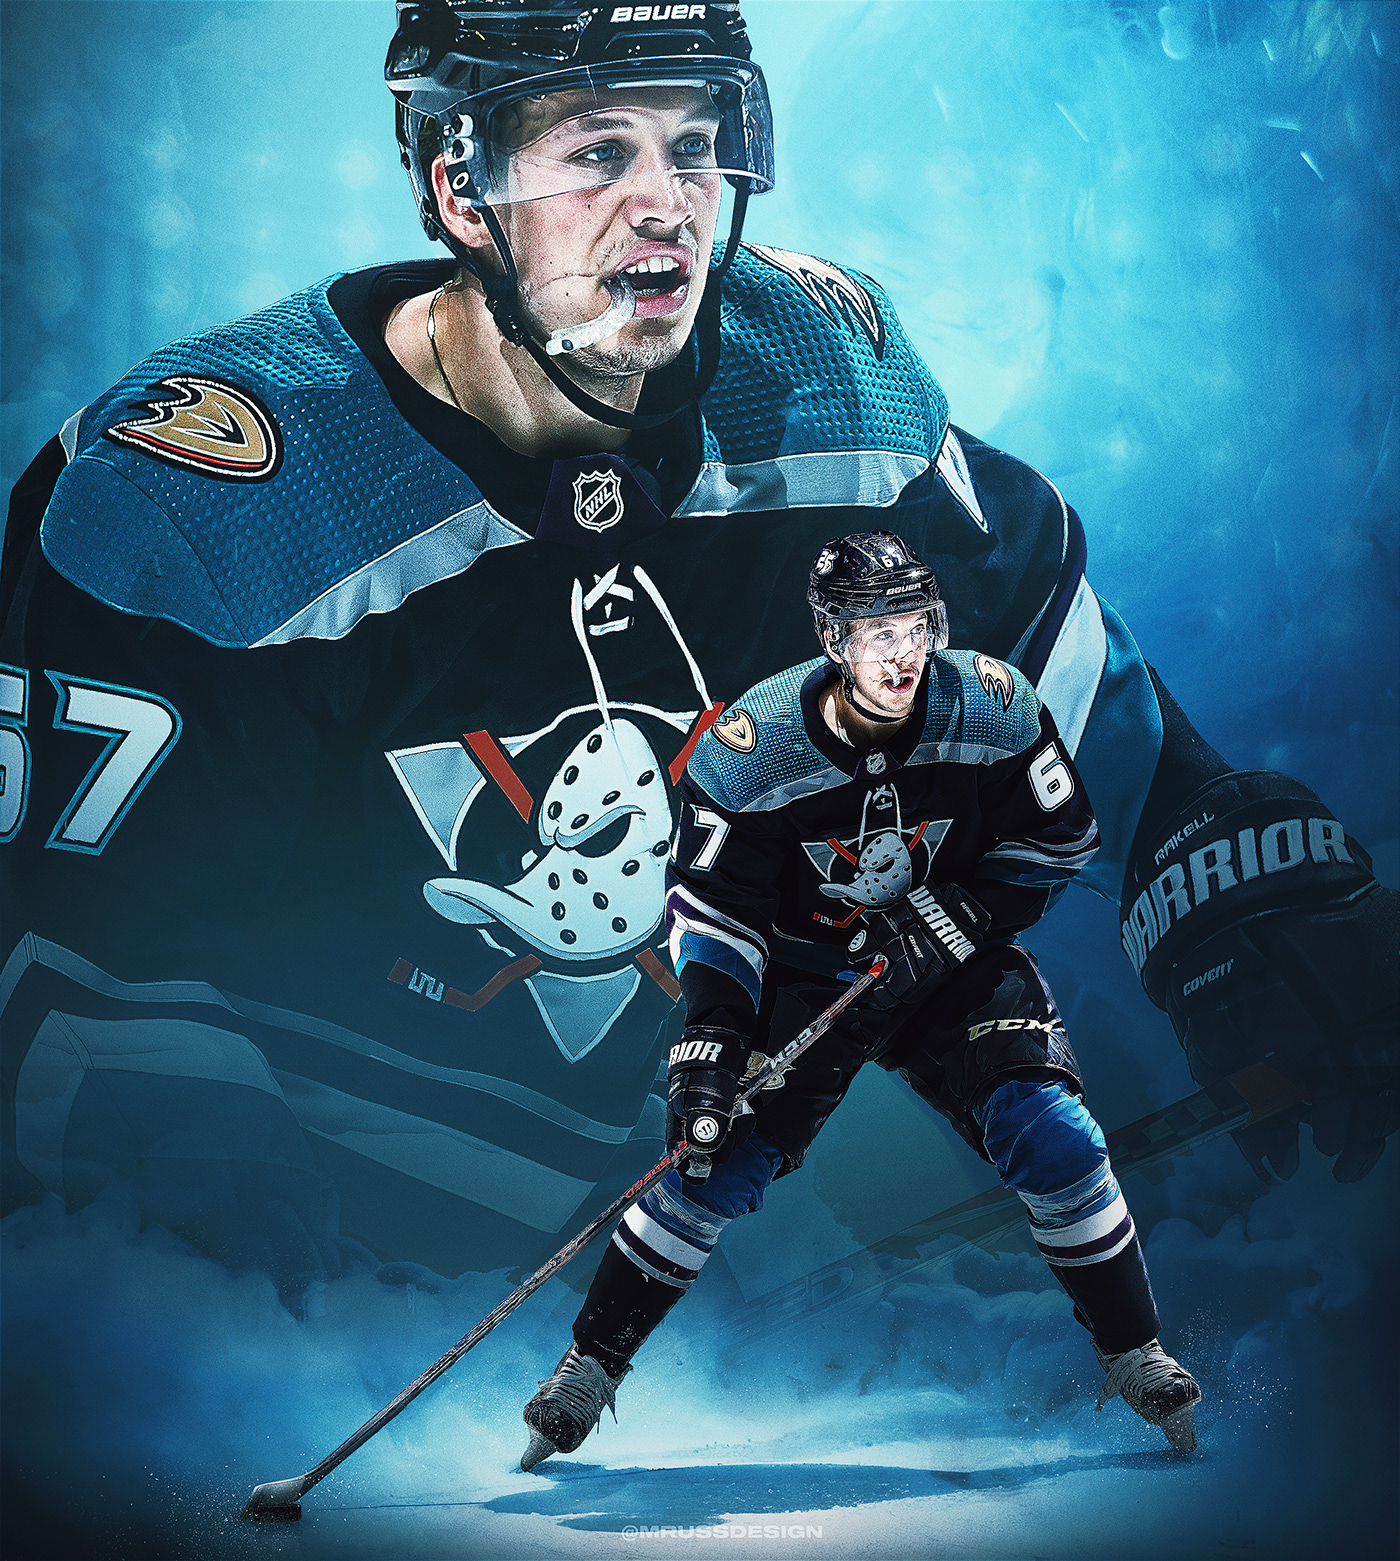 spiraal vos Uitgraving 31 Day Design Challenge | NHL Edition (FULL PROJECT) on Behance